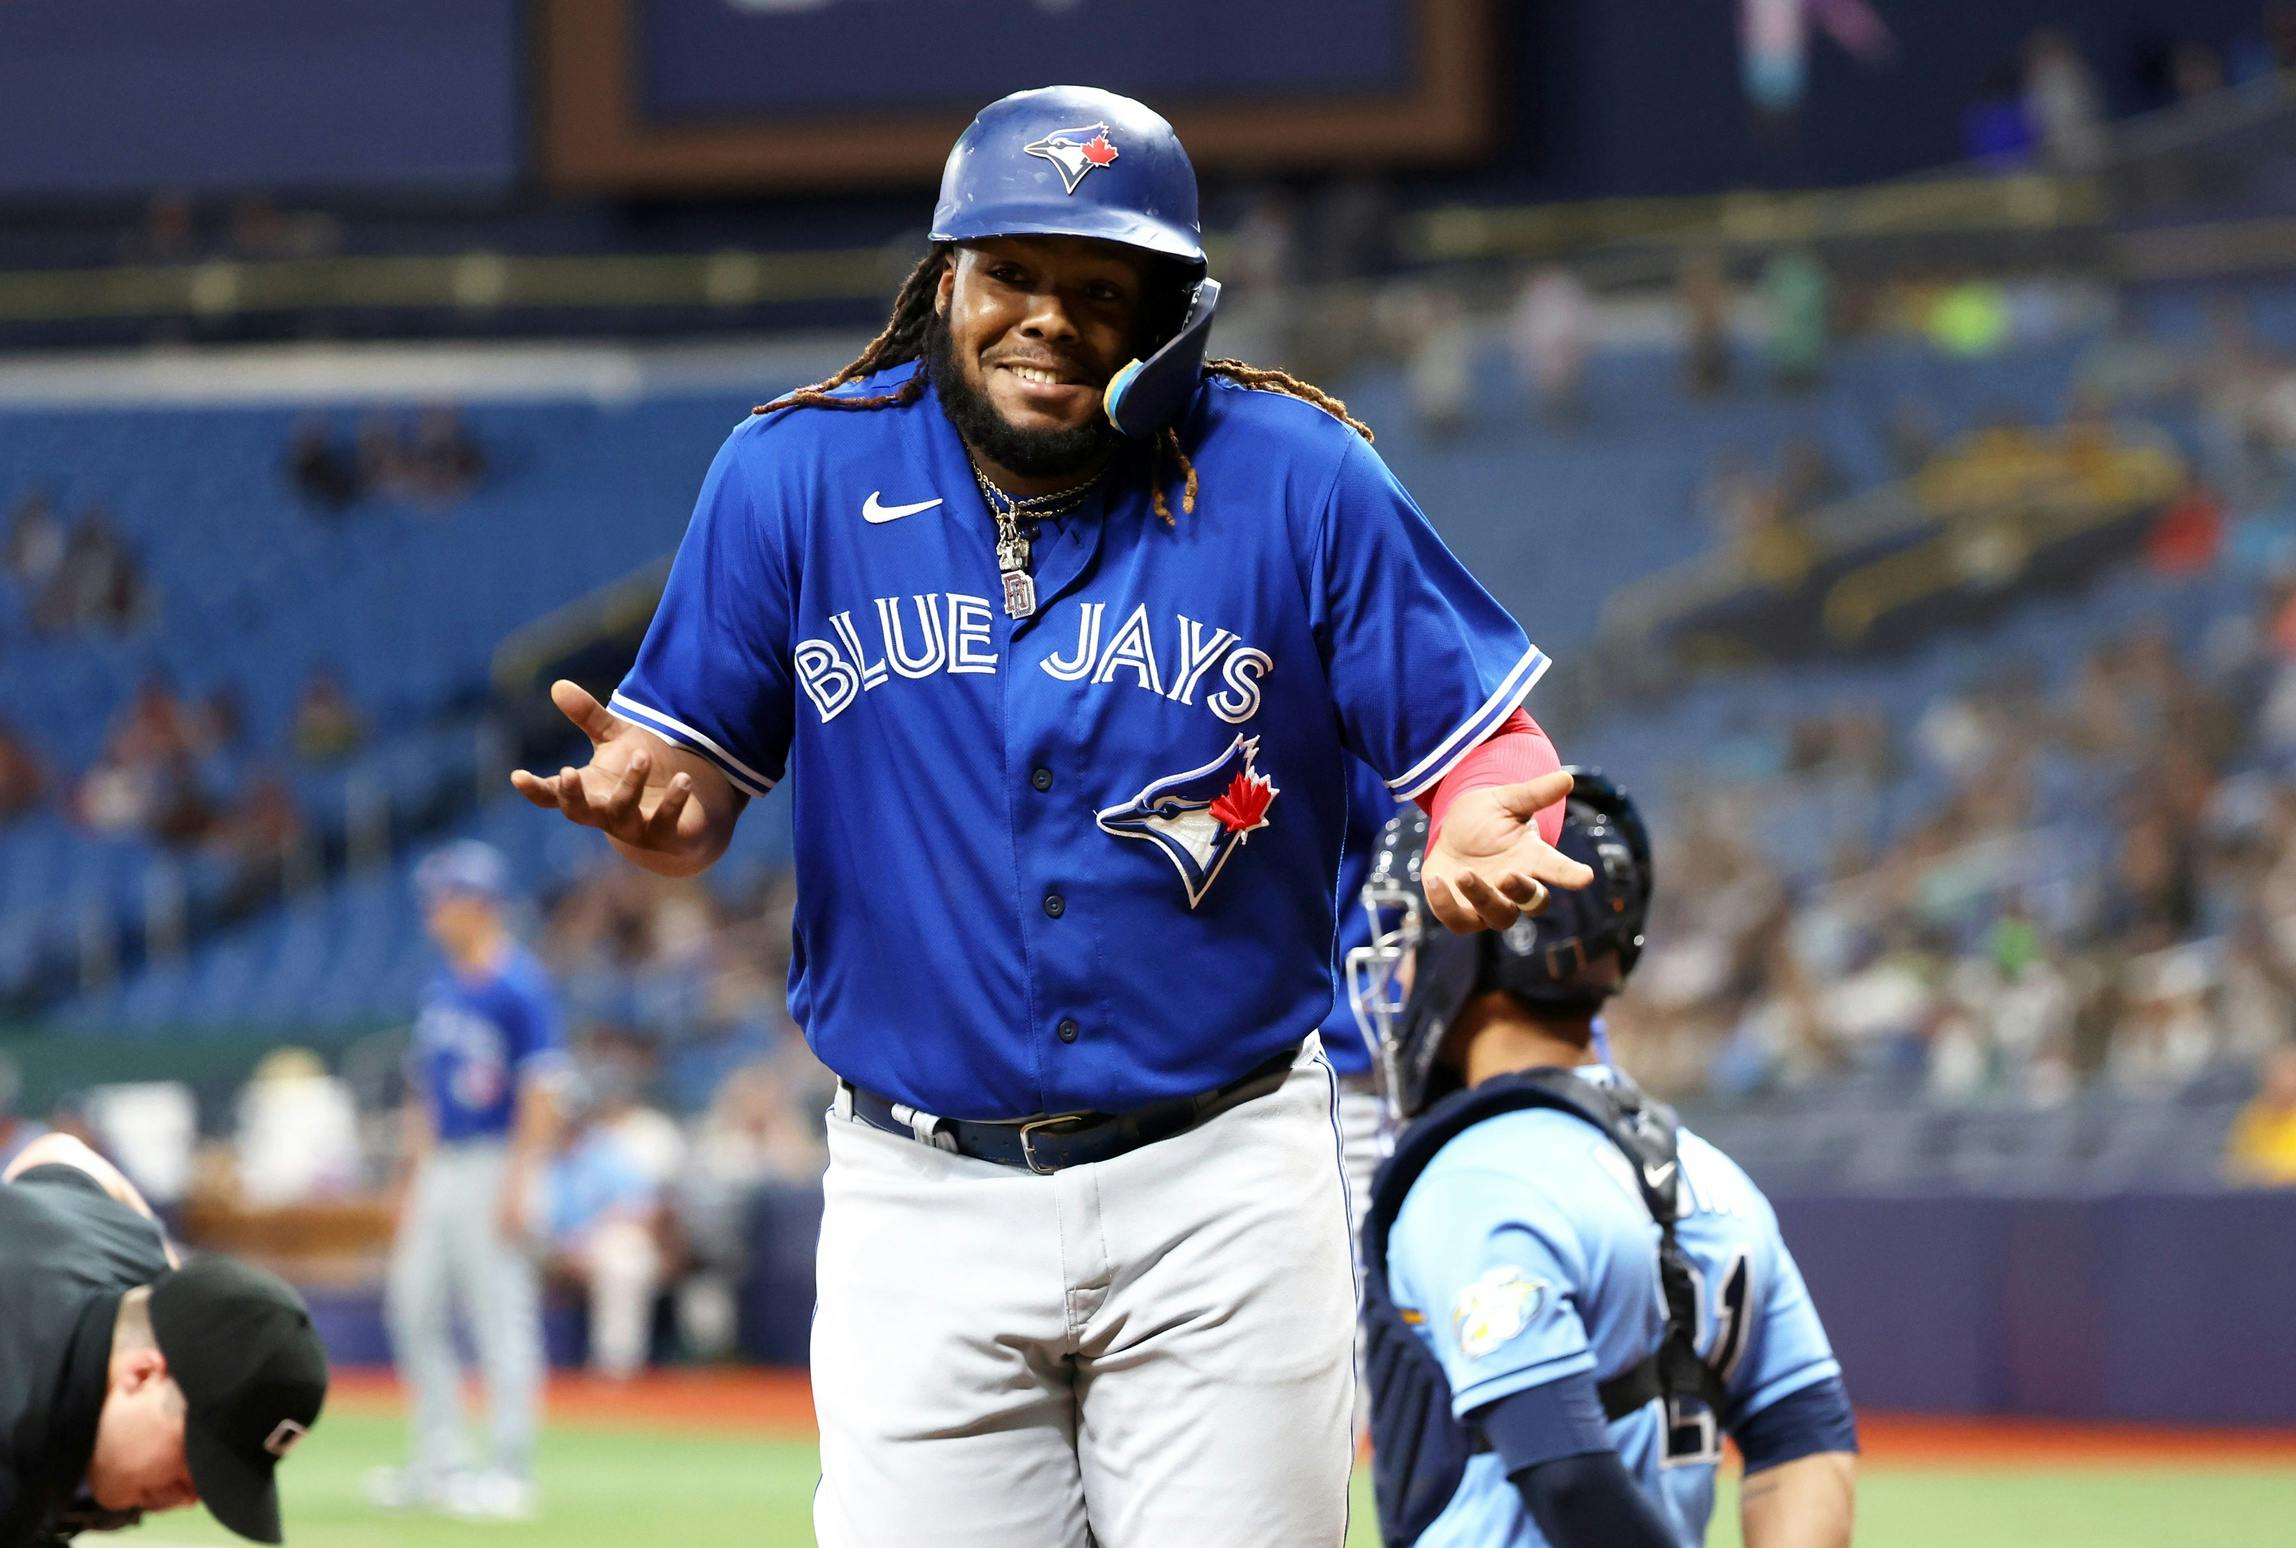 Blue Jays reduce magic number to 1 with win vs. Rays